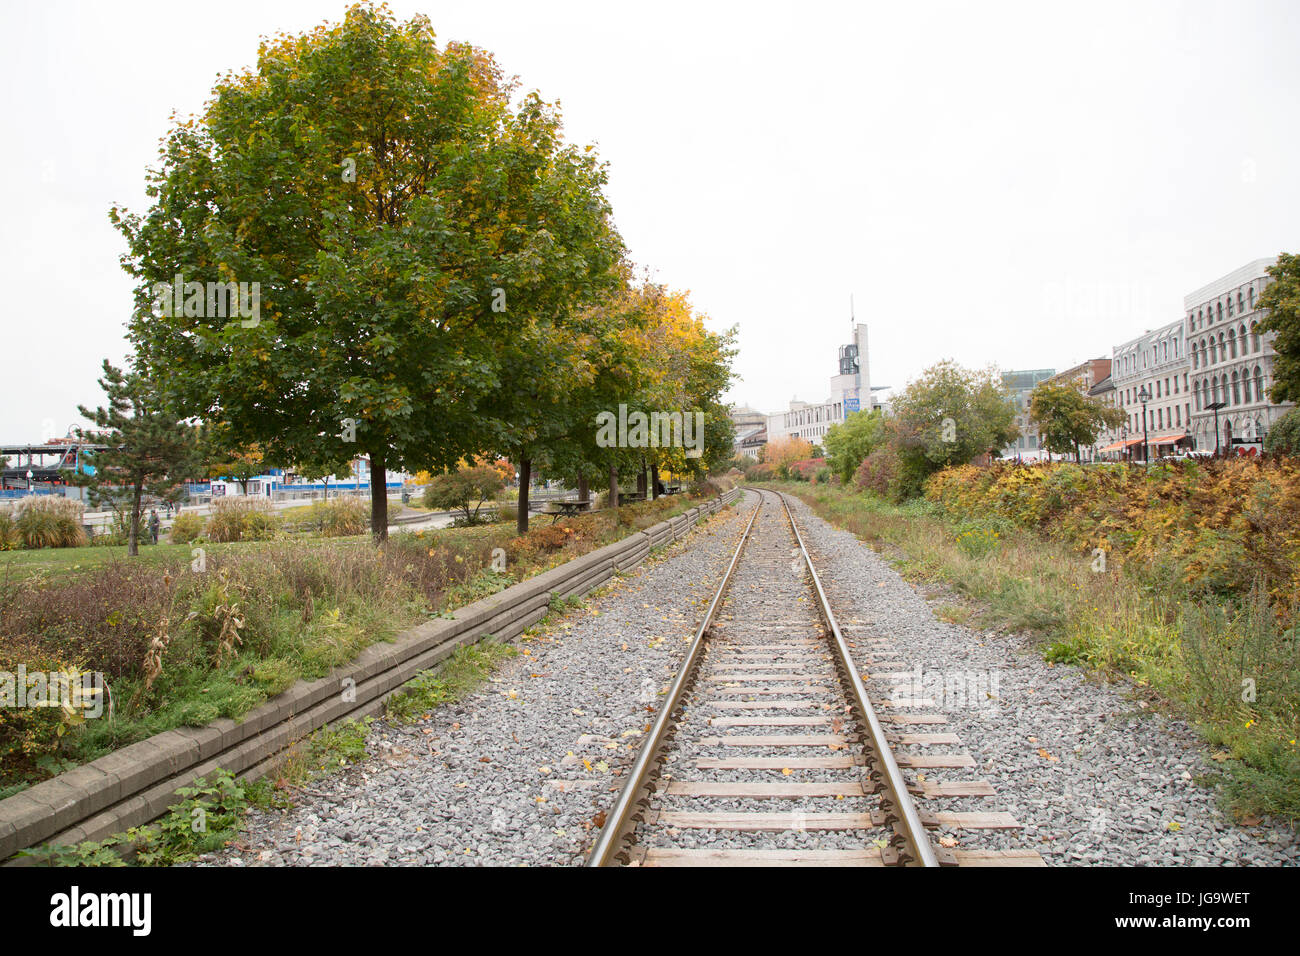 A railway line in Montreal, Canada. It ruins along the promenade by the Old Port. Stock Photo